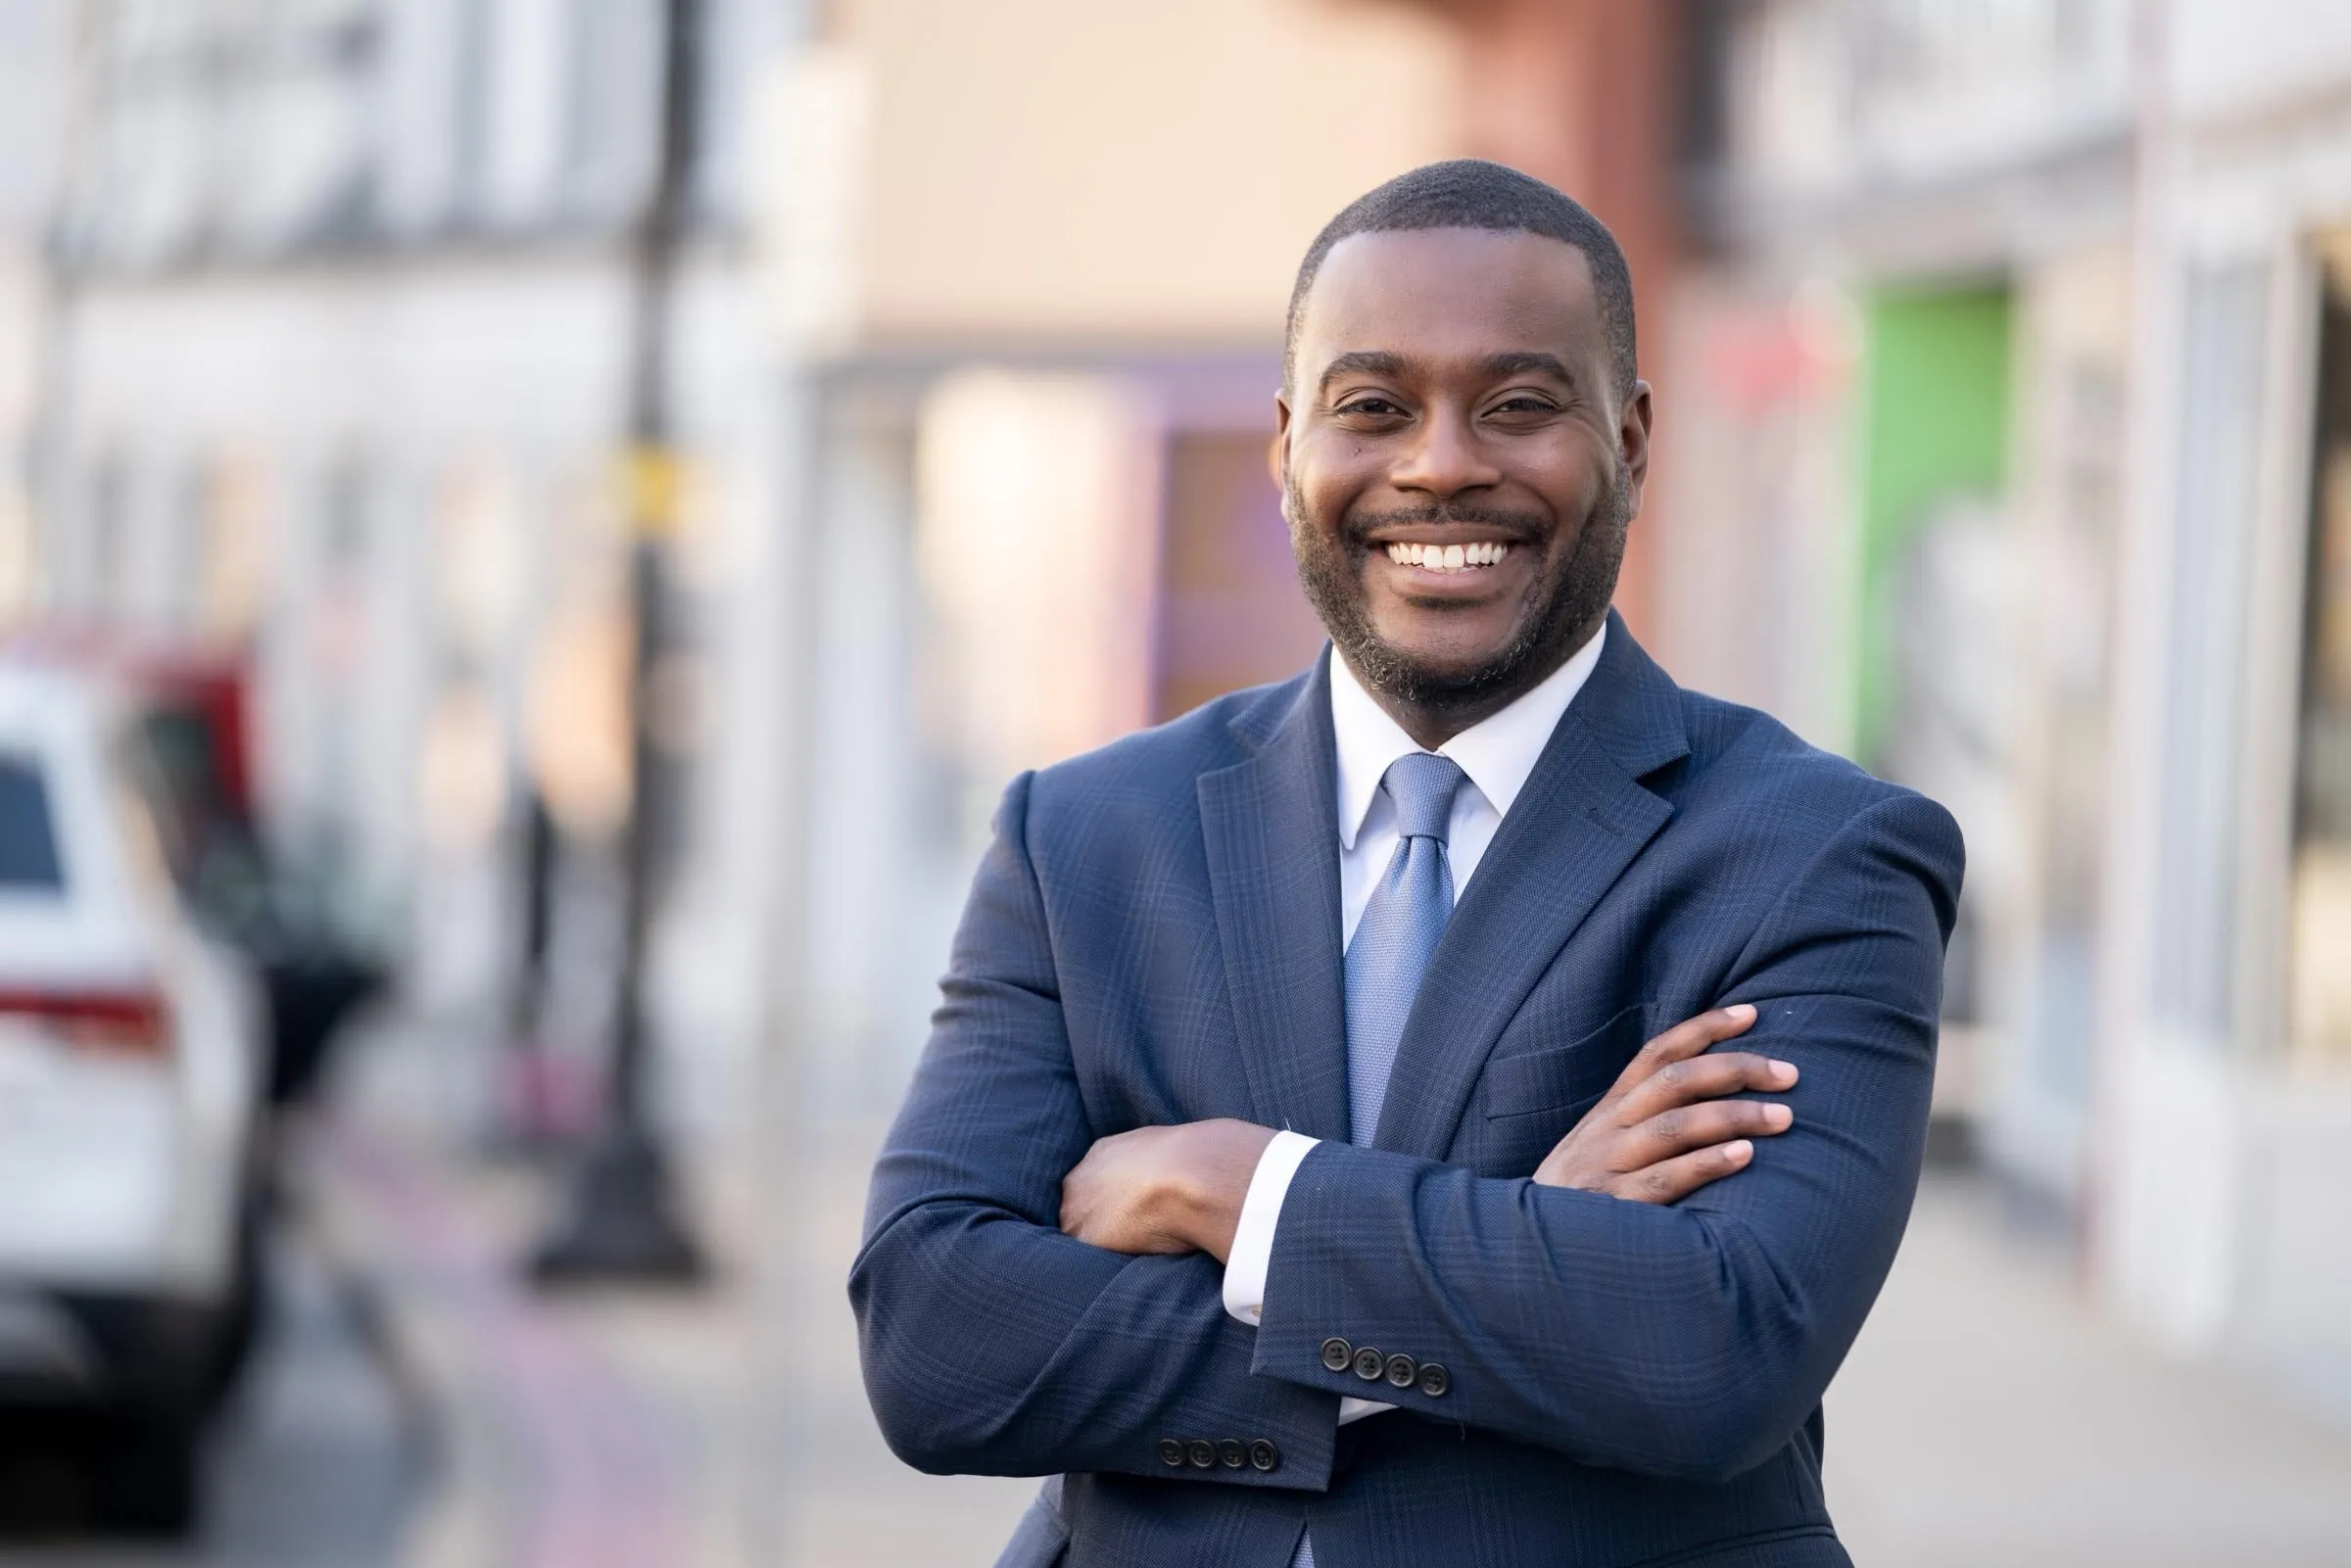 Former White House aide Gabe Amo becomes first Black American to represent Rhode Island’s 1st Congressional District